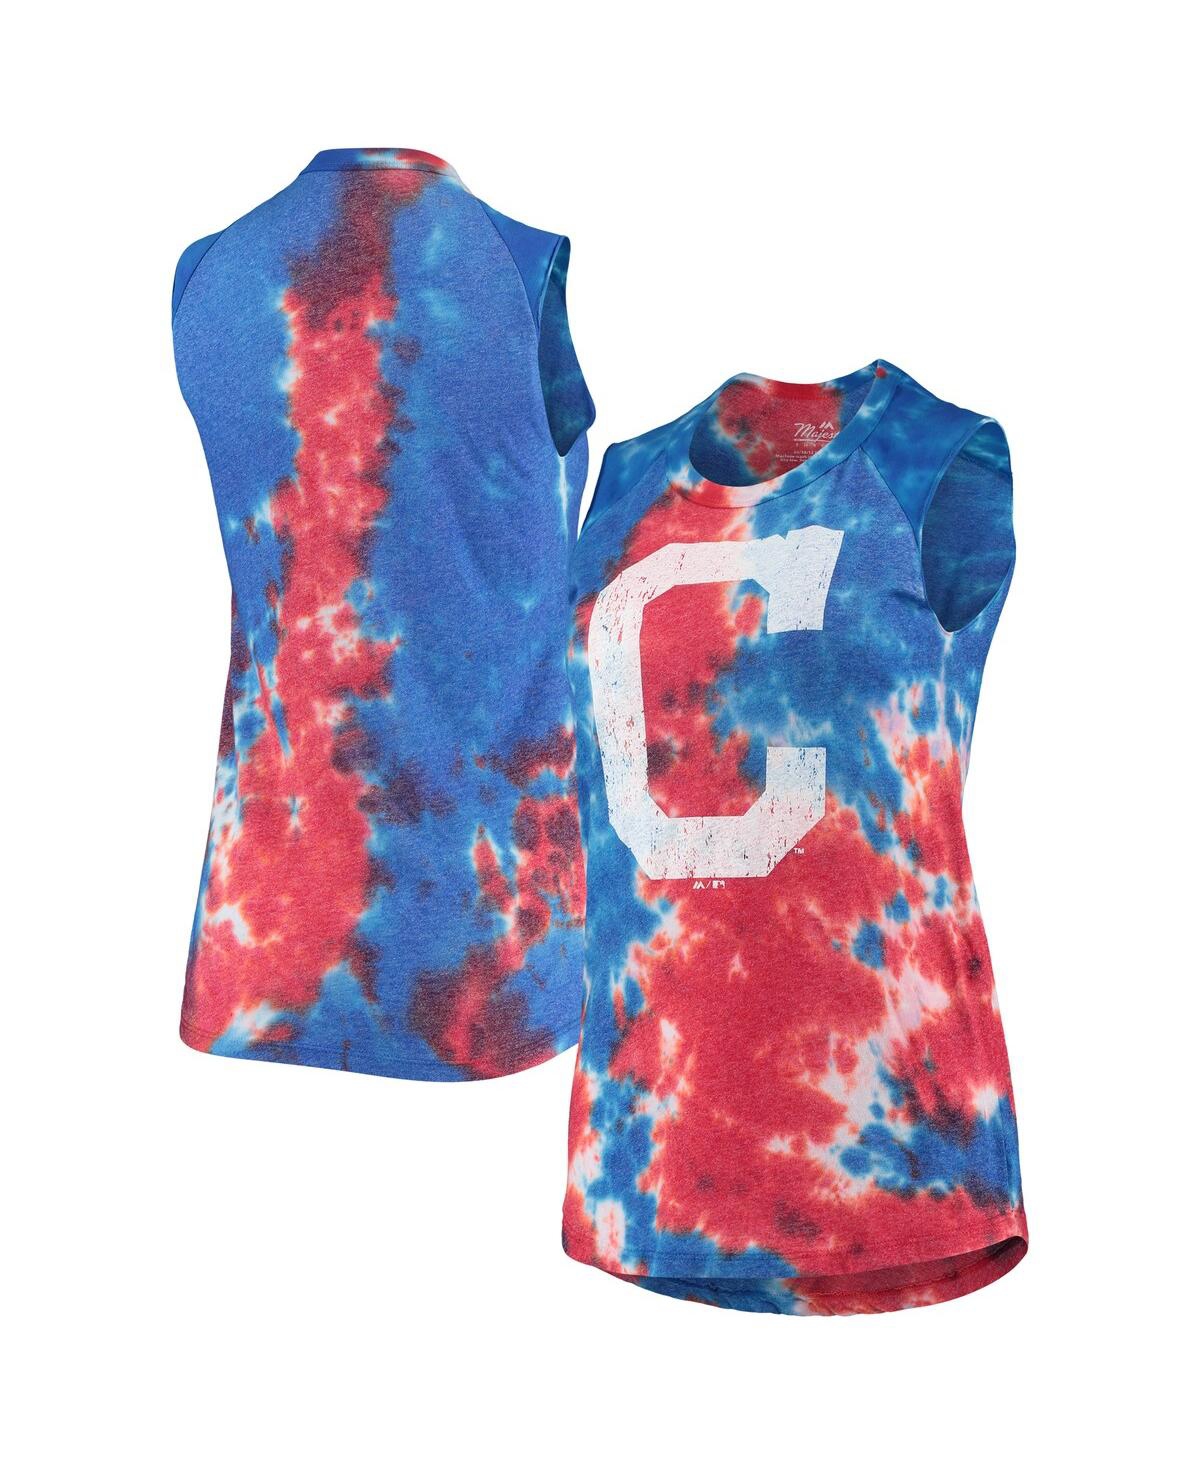 Women's Majestic Threads Red, Blue Cleveland Indians Tie-Dye Tri-Blend Muscle Tank Top - Red, Blue